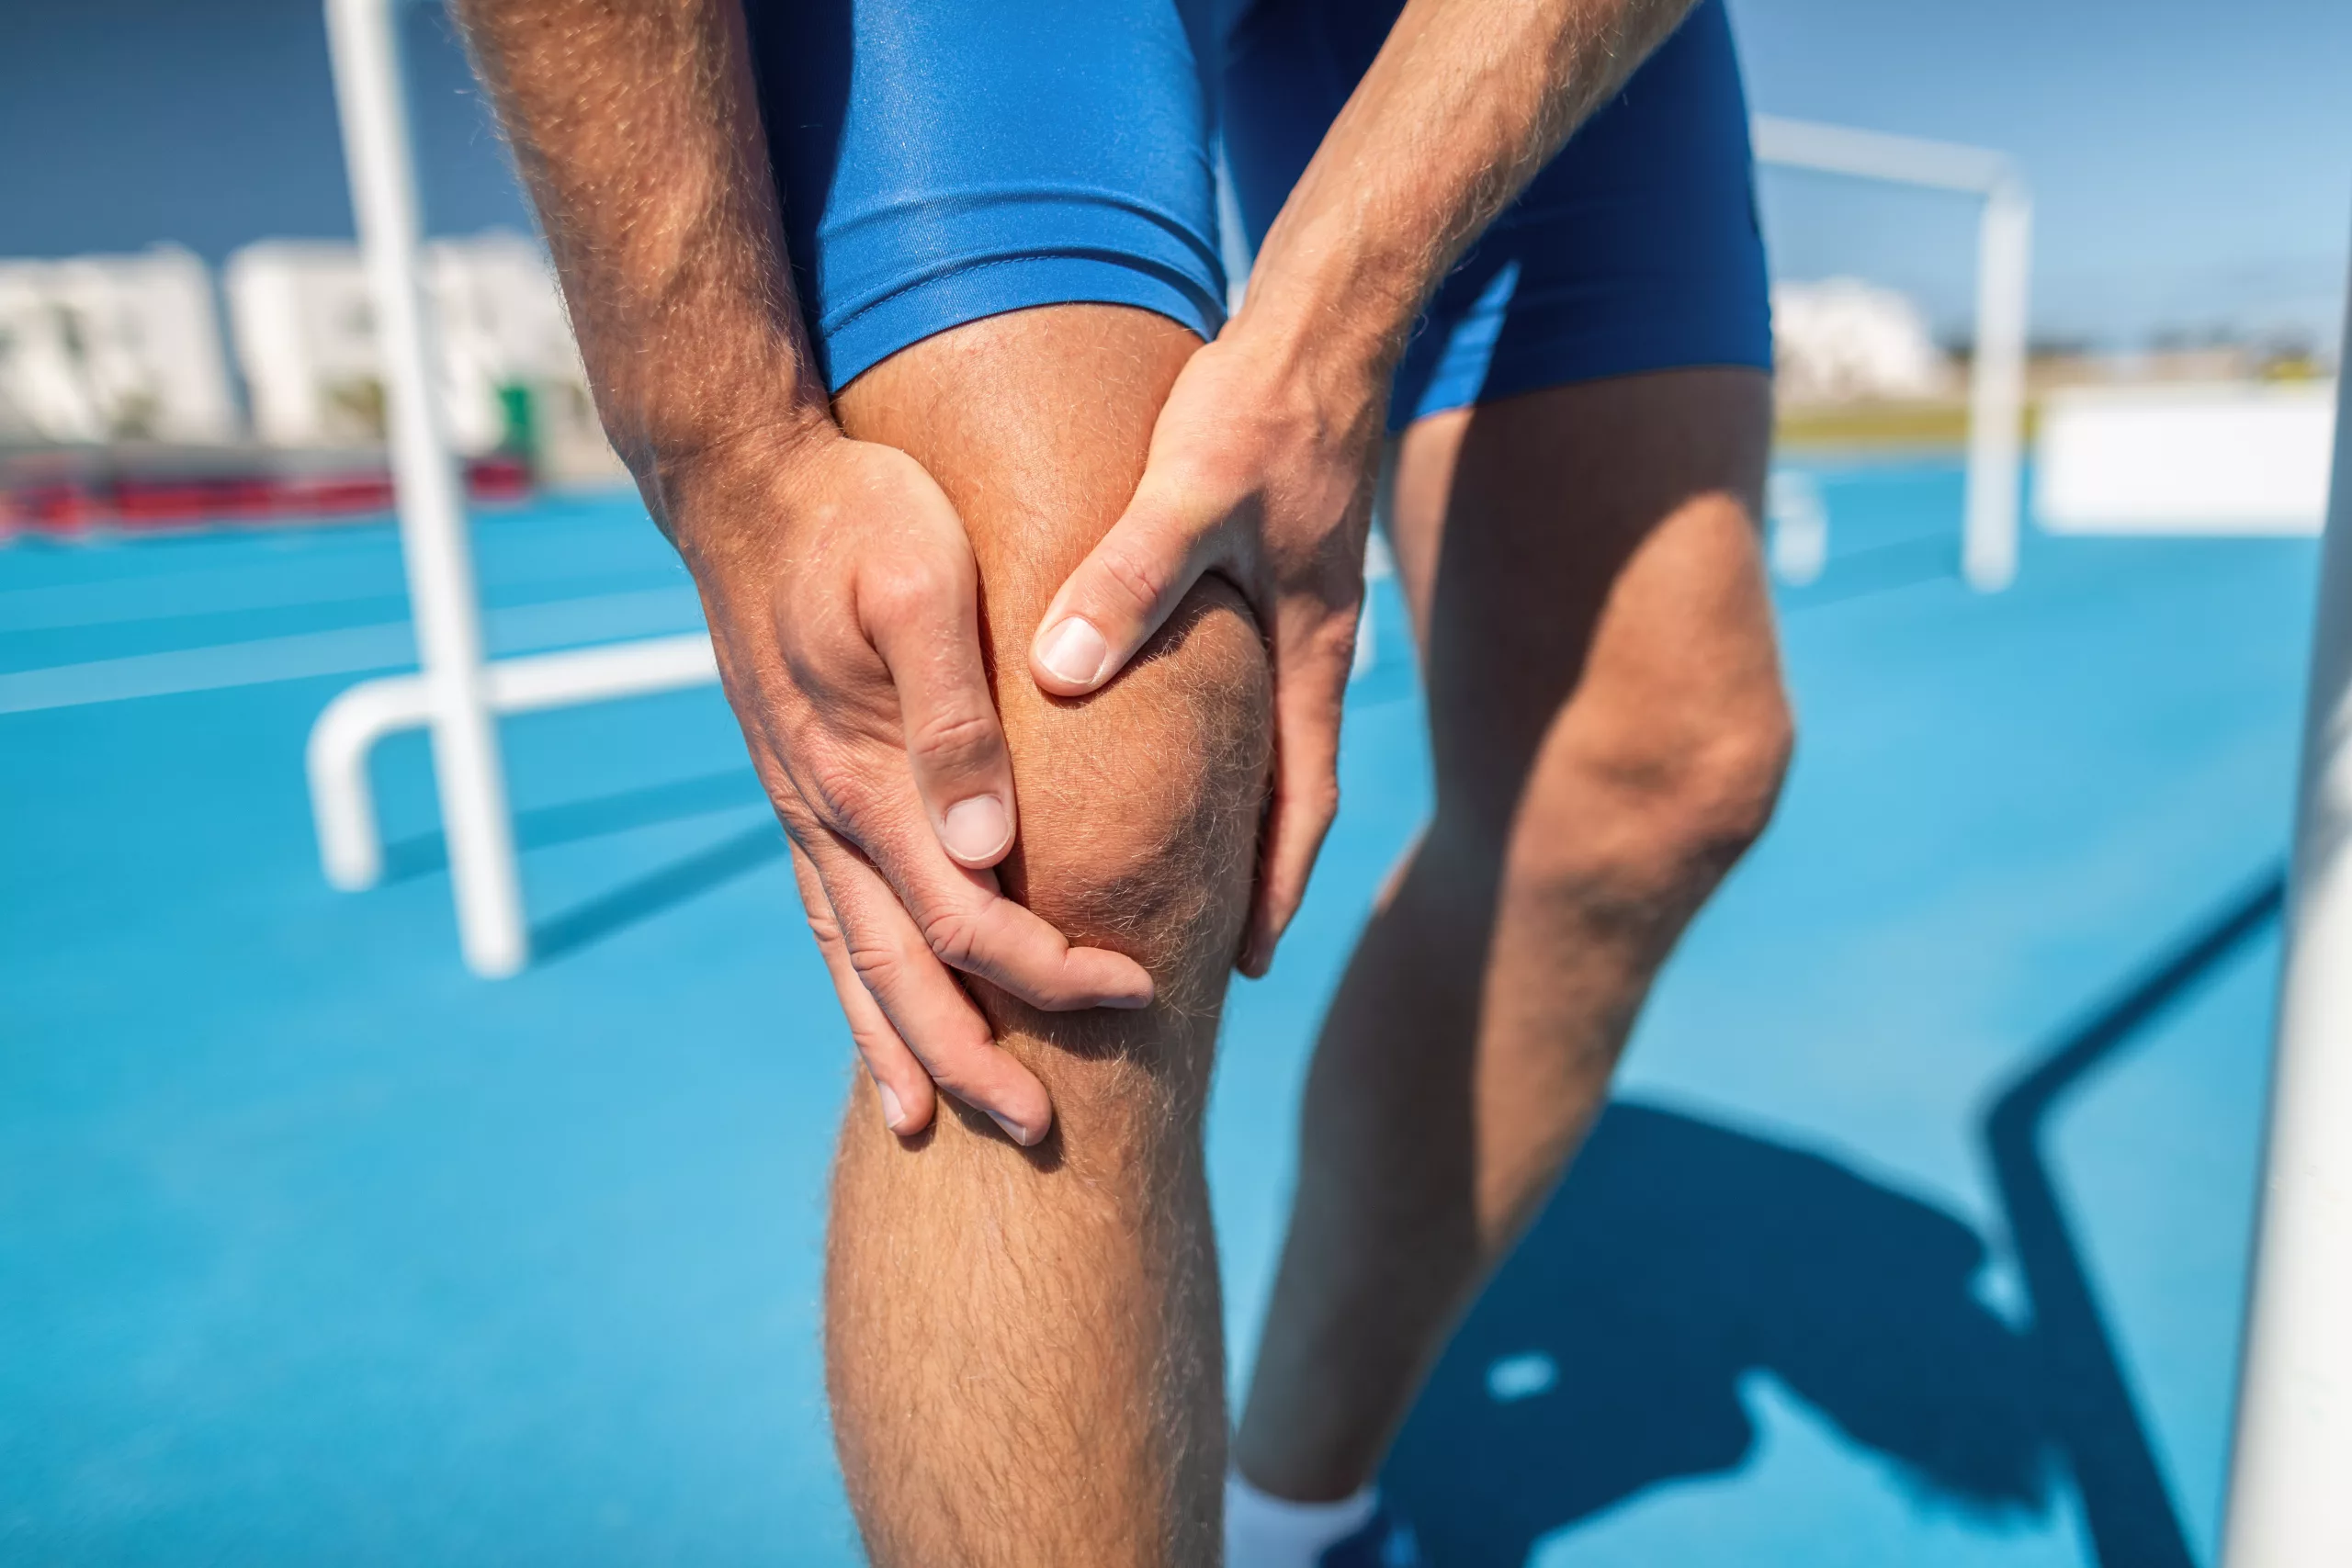 Knee pain professional athlete sport injury - sports running knee acciden on man runner. Sprained knee joint, arthritis. Closeup of legs, muscle and knee outdoors.